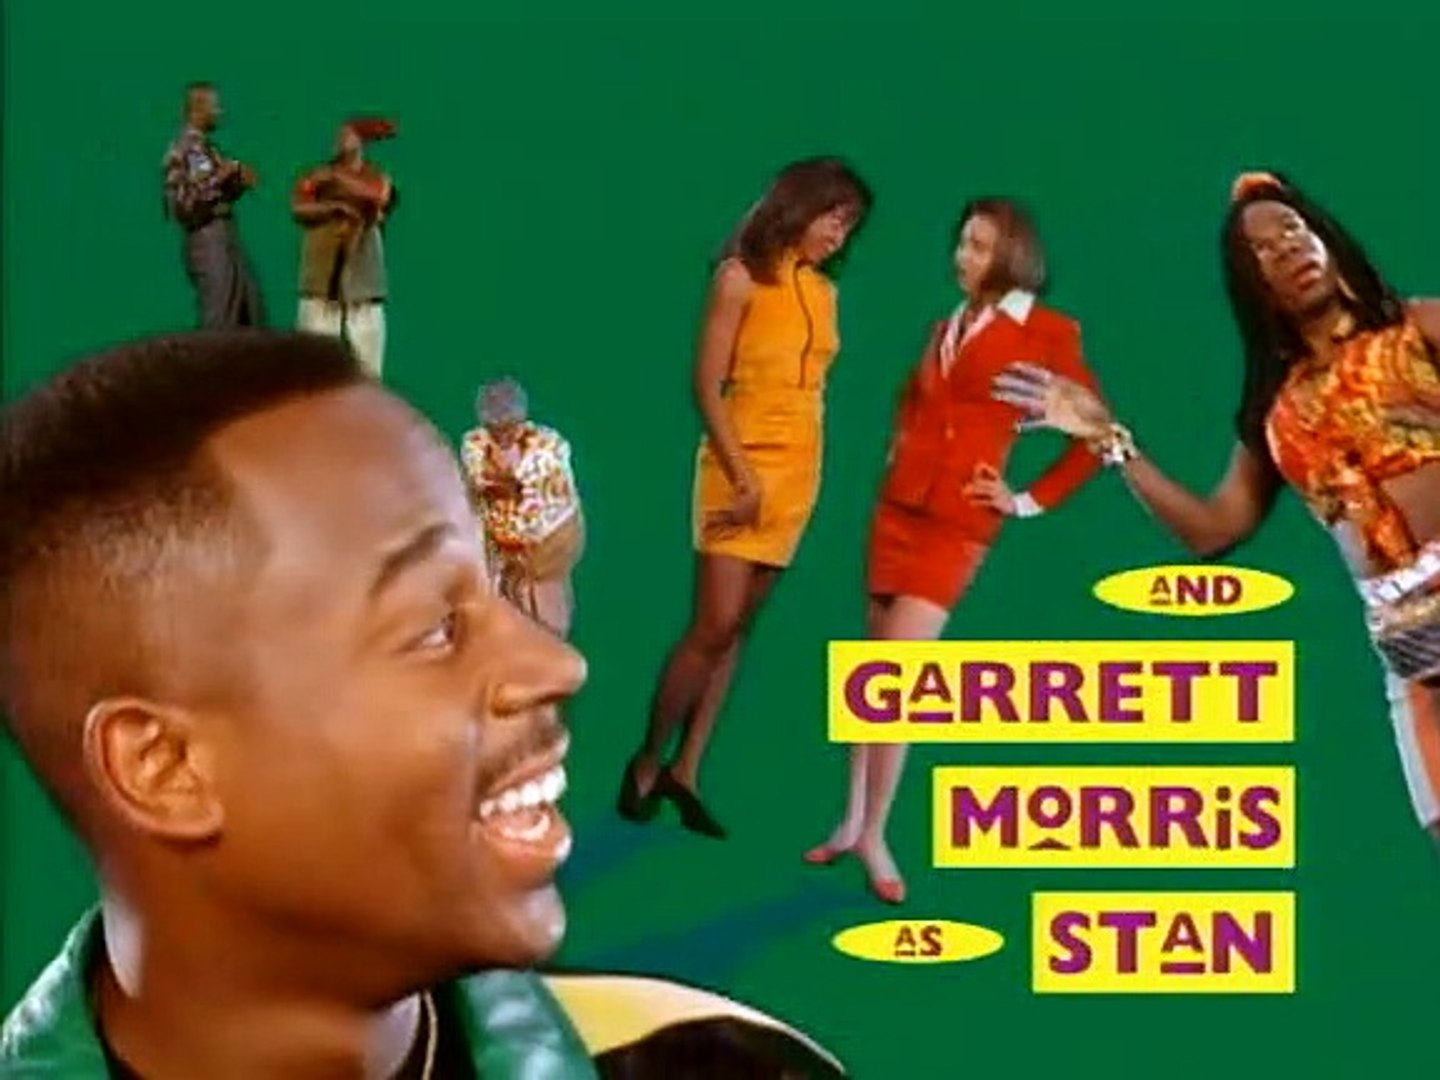 Best of Martin lawrence show full episodes free